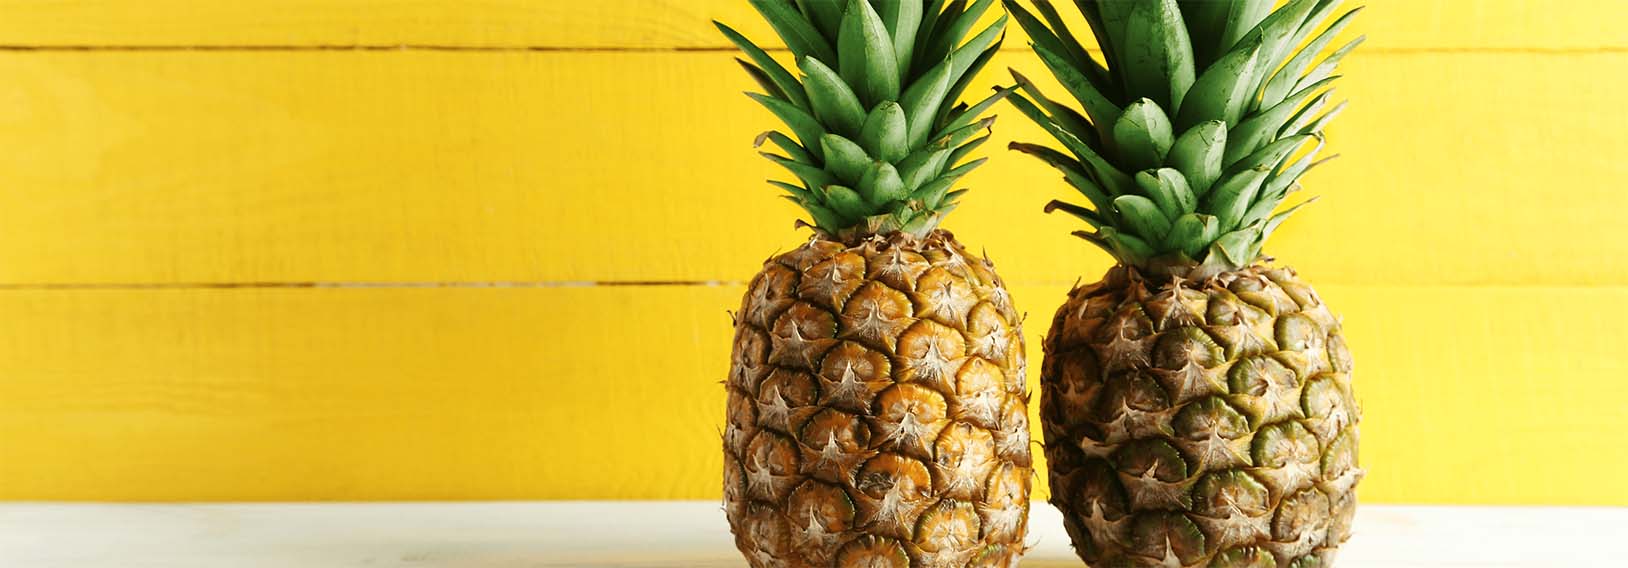 Pineapples in front of yellow wall